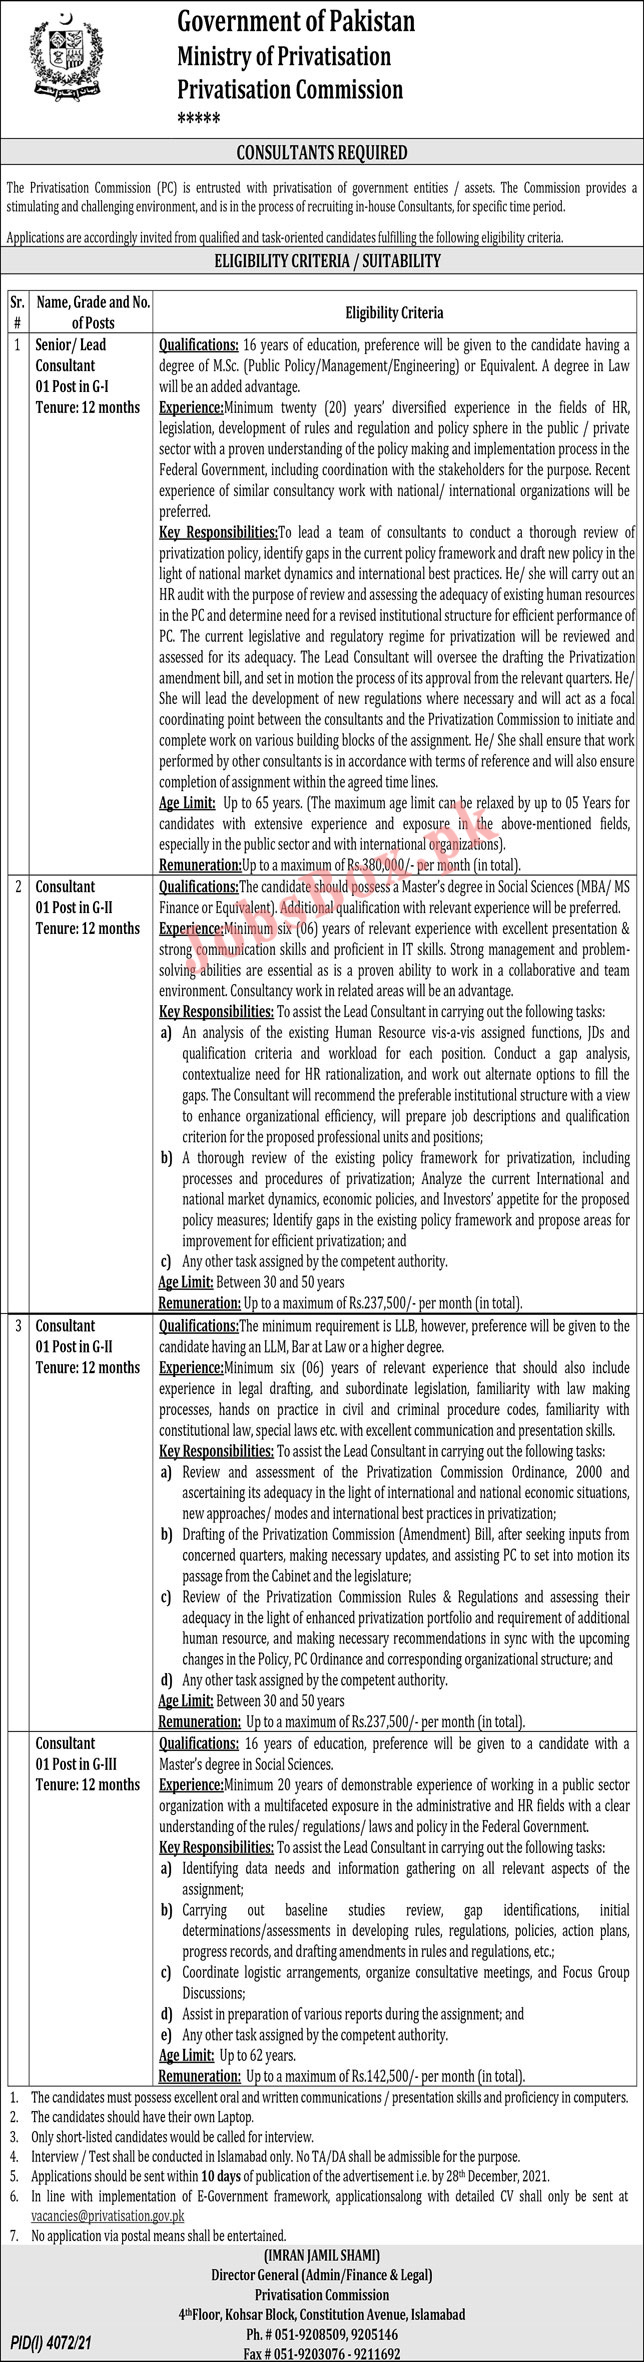 Privatisation Commission Government of Pakistan Jobs 2021